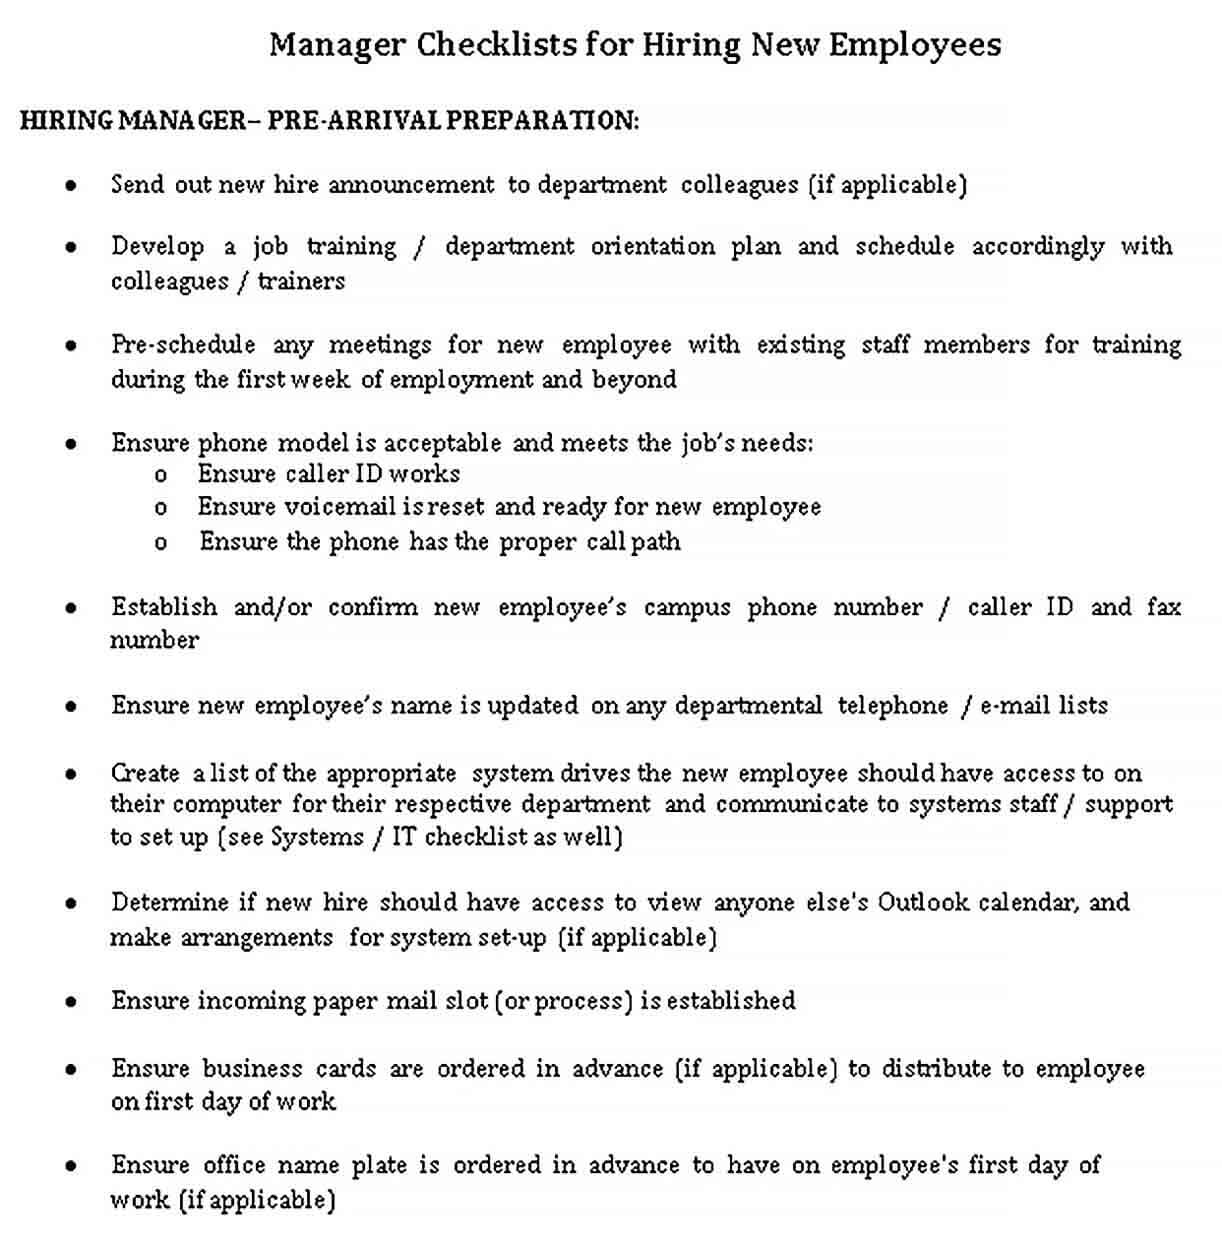 Sample New Employee Manager Checklist Template